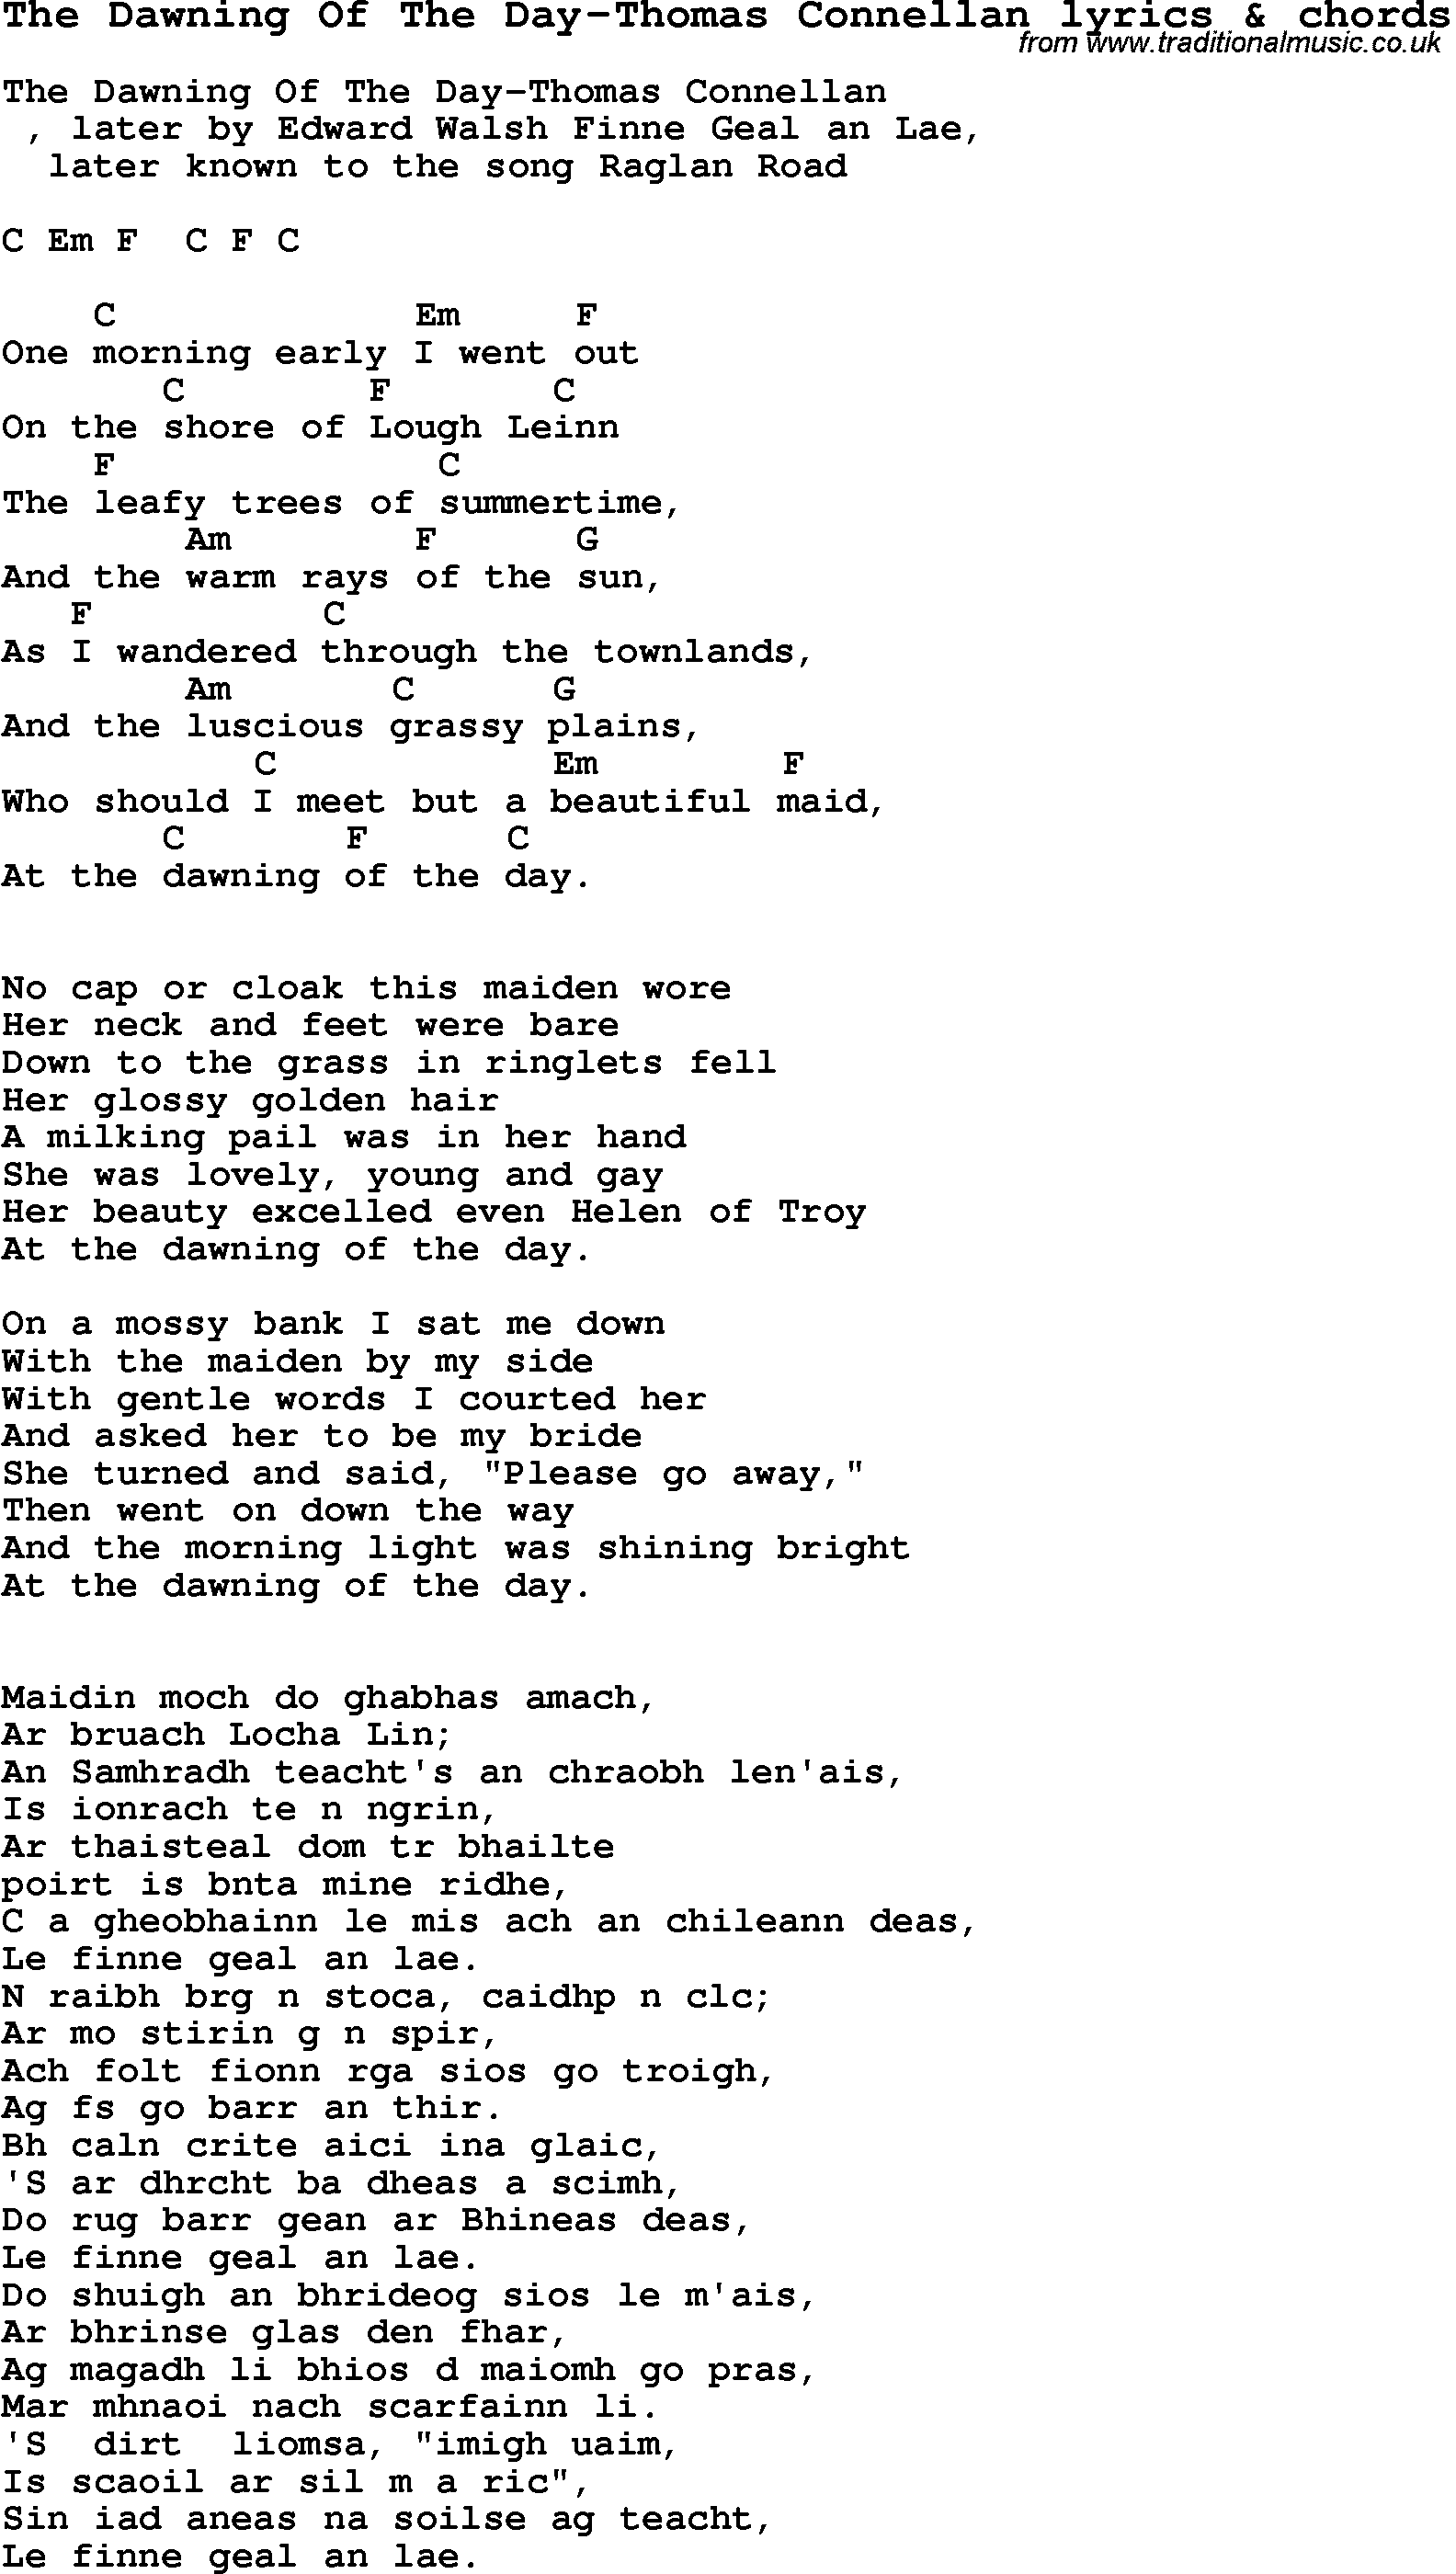 Love Song Lyrics for: The Dawning Of The Day-Thomas Connellan with chords for Ukulele, Guitar Banjo etc.